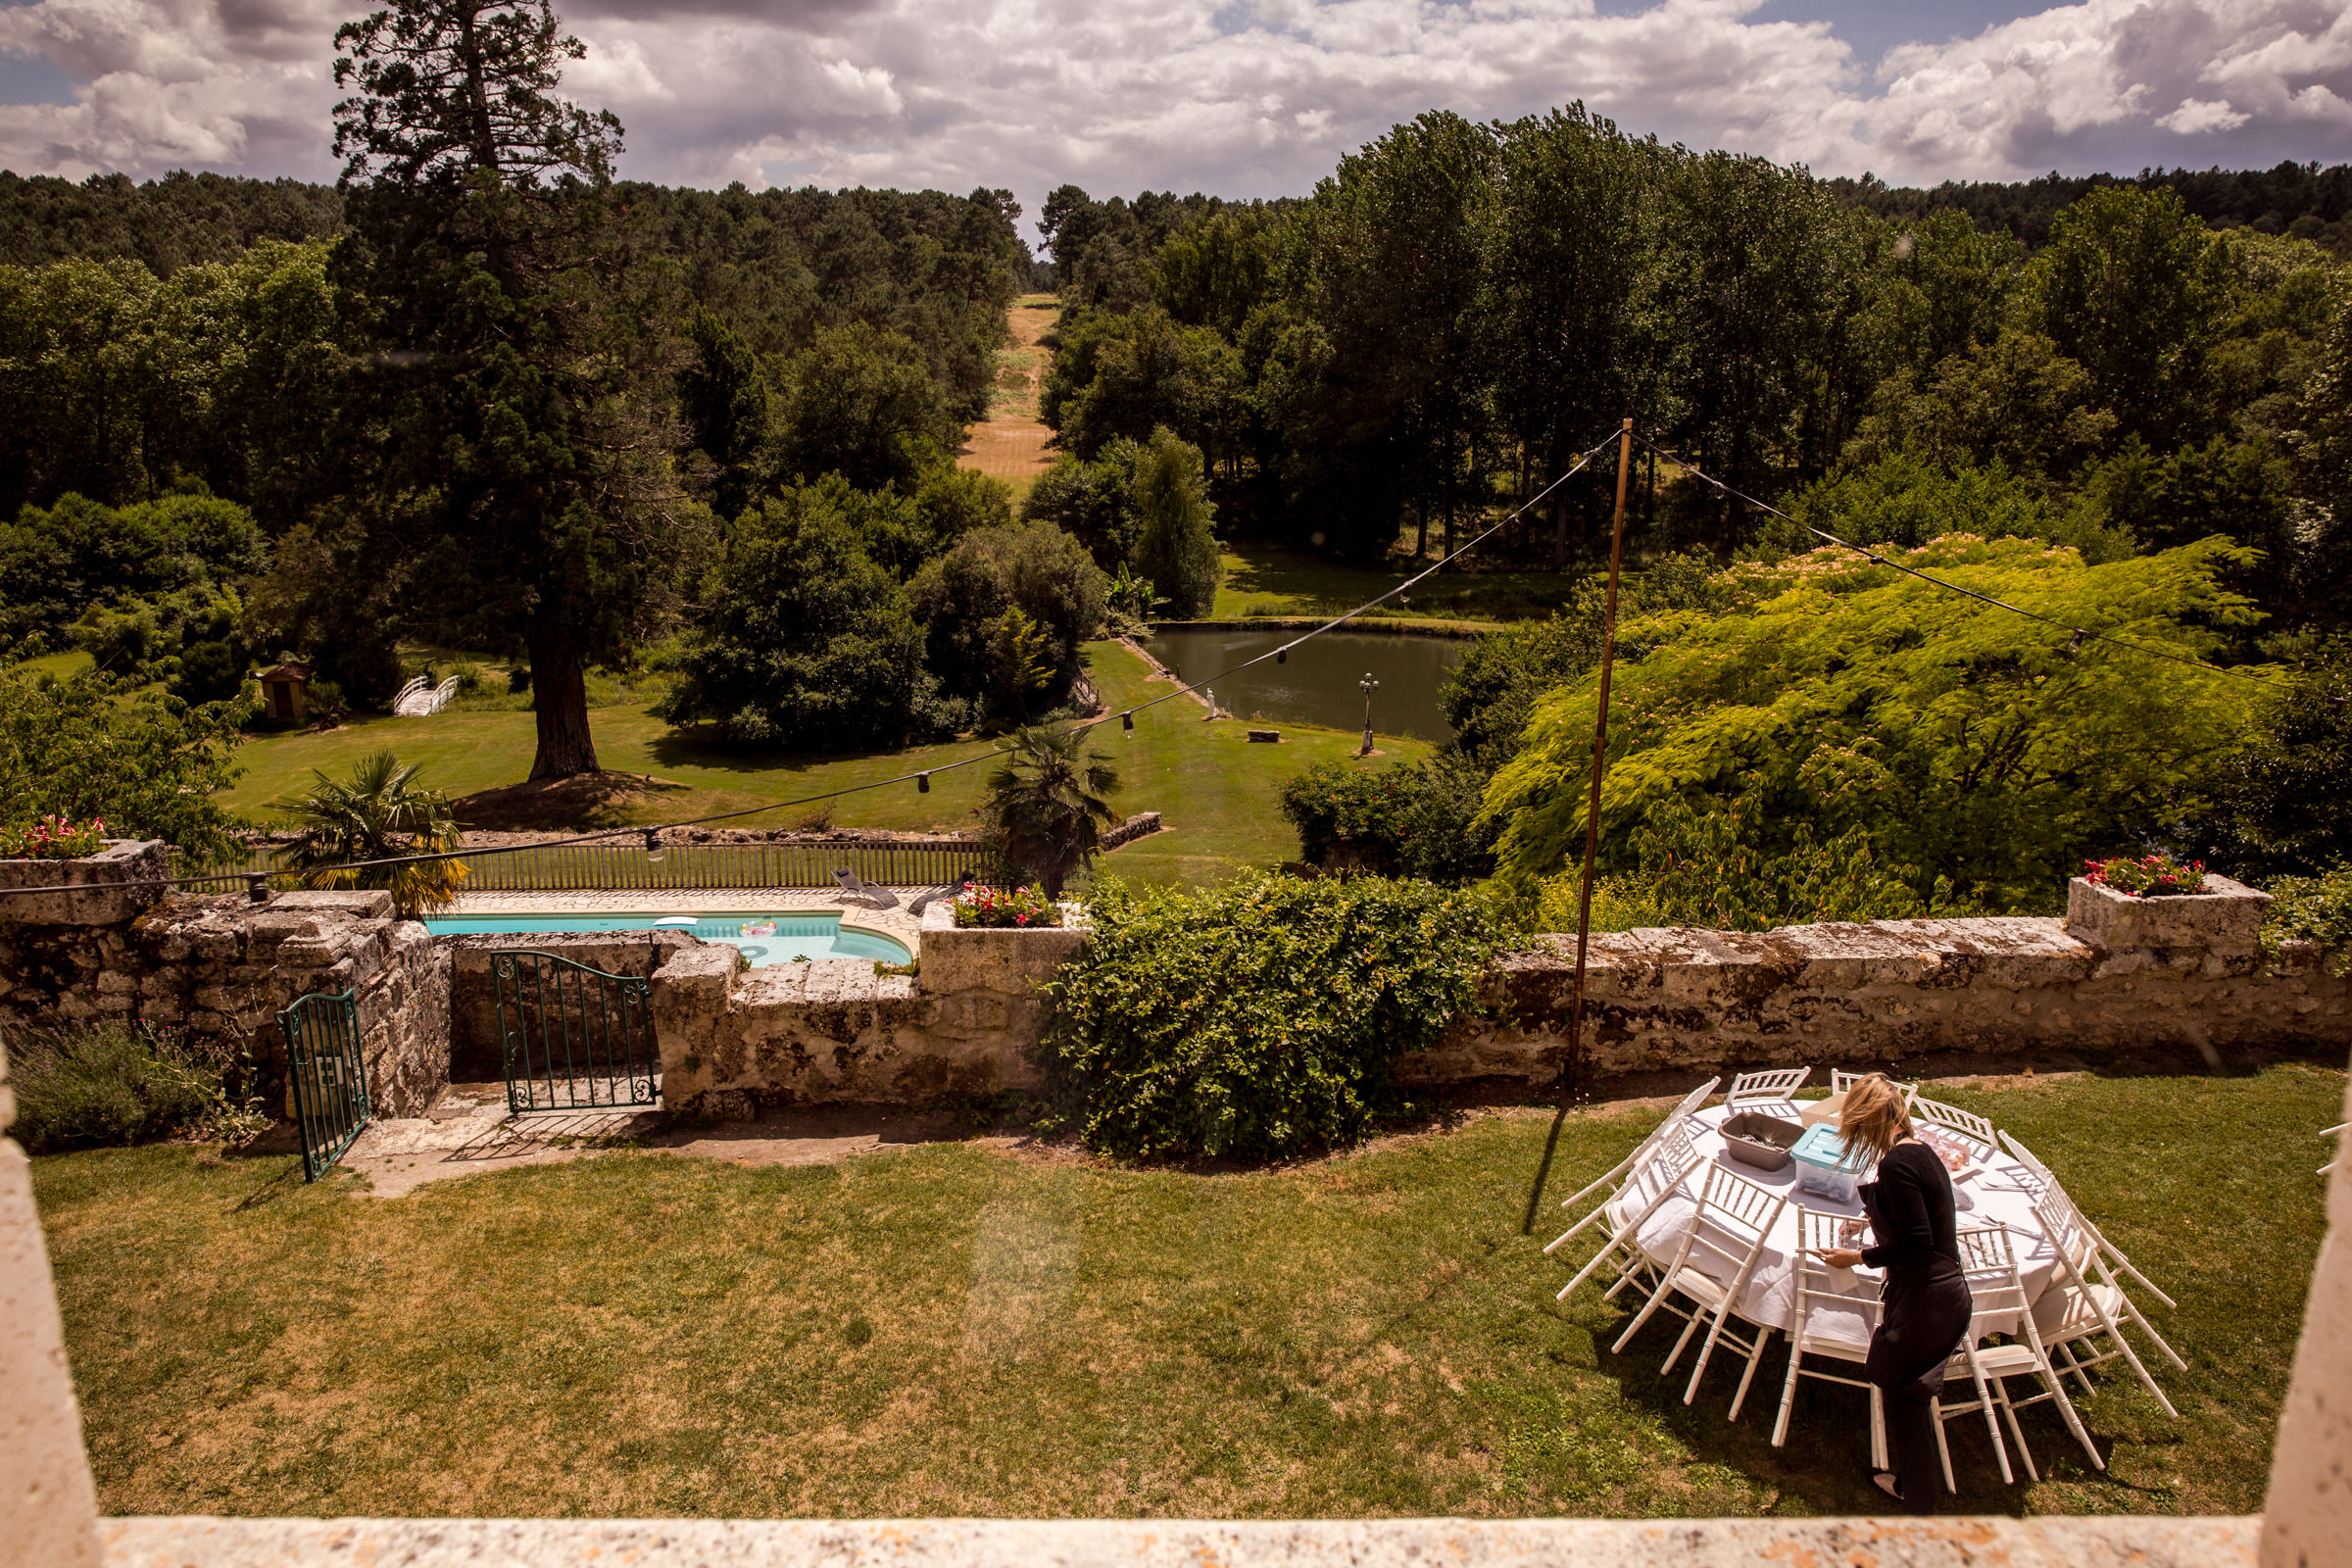 Uk Wedding photographers working at chateau de lisse in gascony 021.jpg